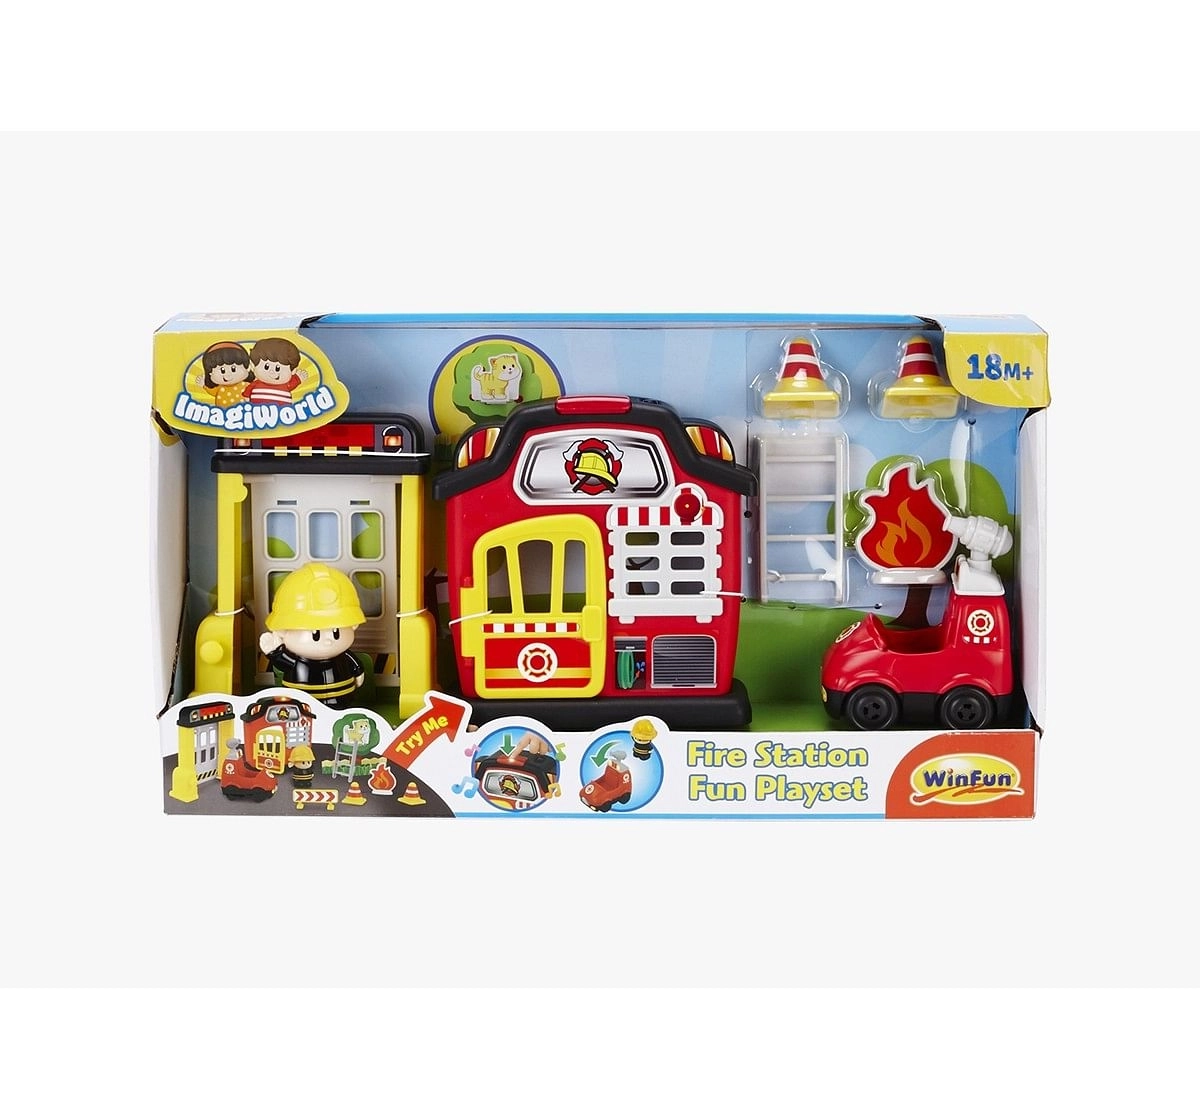 Winfun Fire Station Fun Playset Learning Toys for Kids age 18M + 